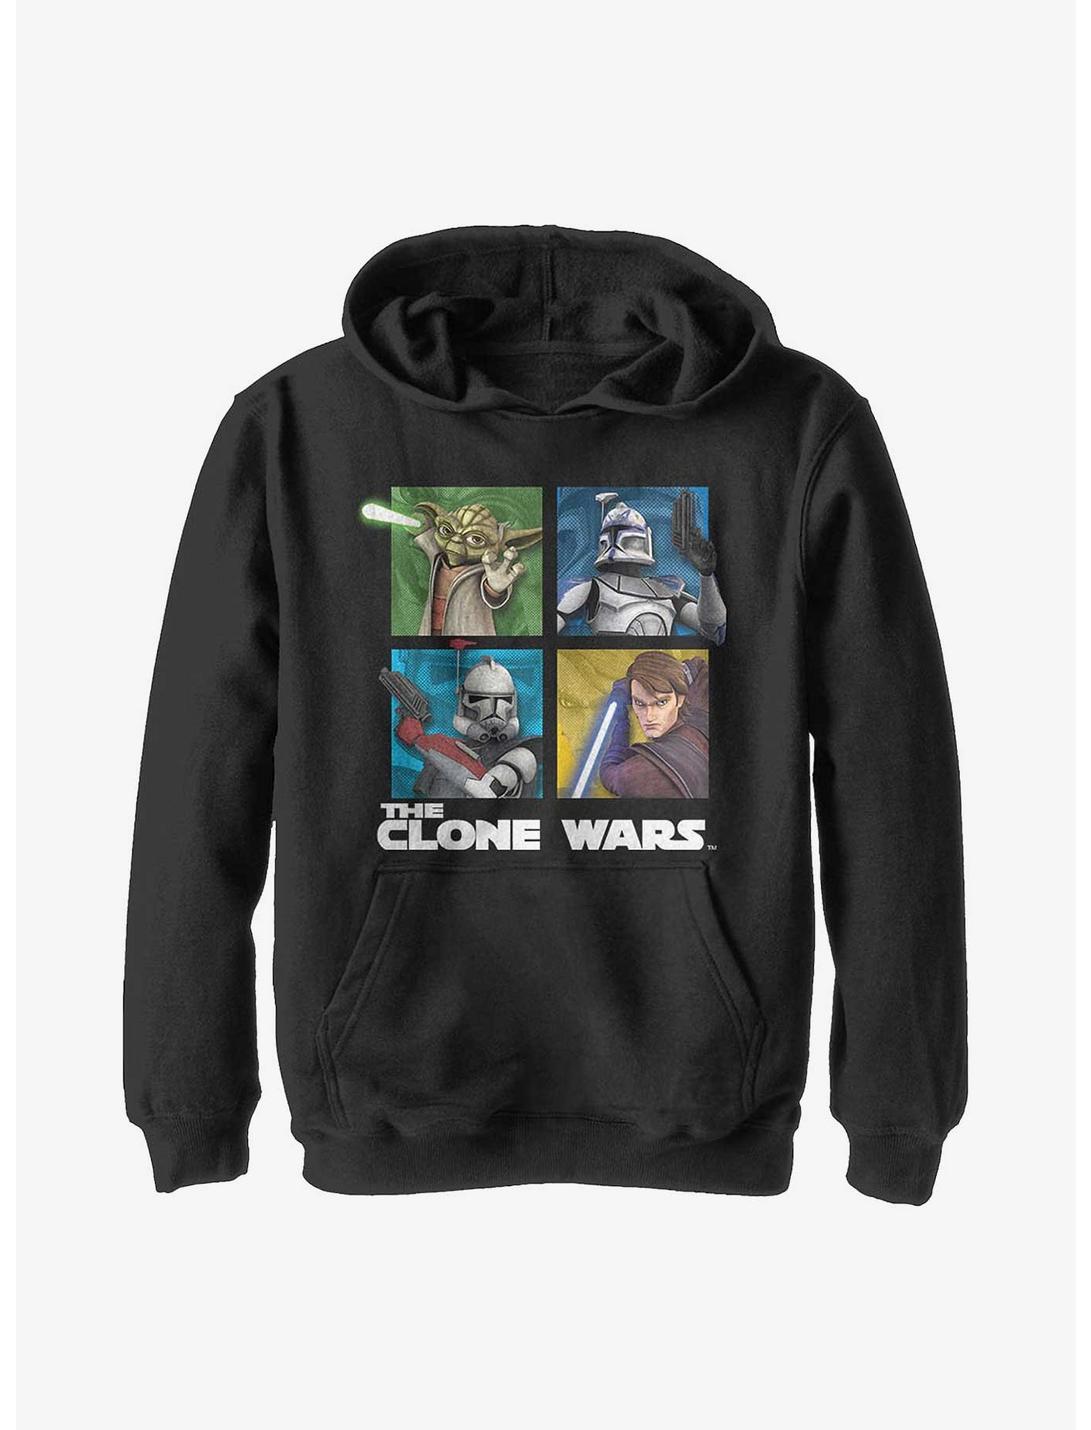 Star Wars: The Clone Wars Panel Four Youth Hoodie, BLACK, hi-res